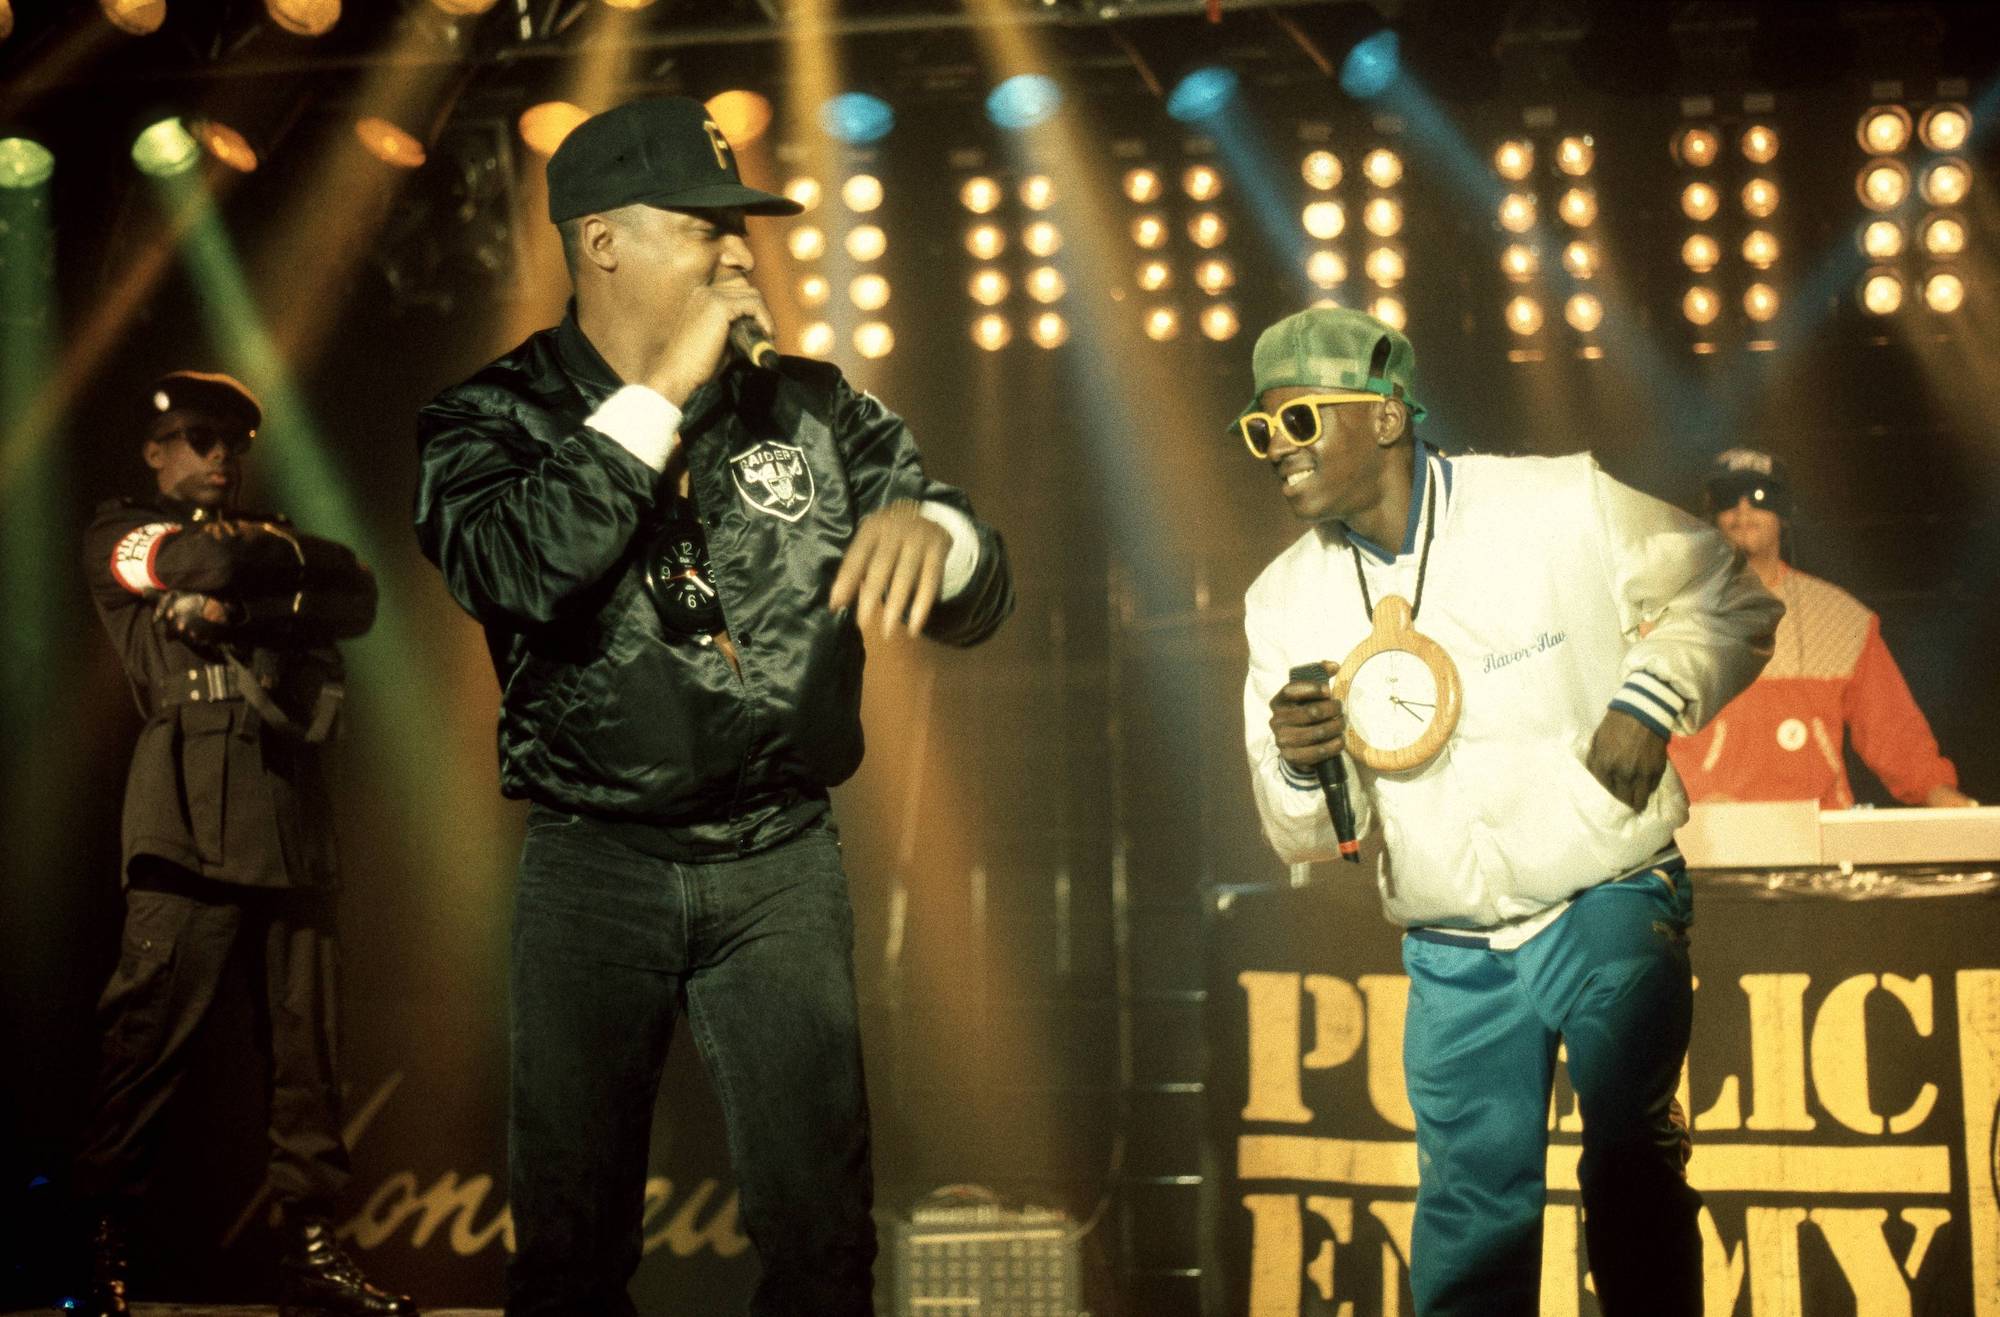 Public Enemy: Our 1988 Interview With Chuck D and Flavor Flav